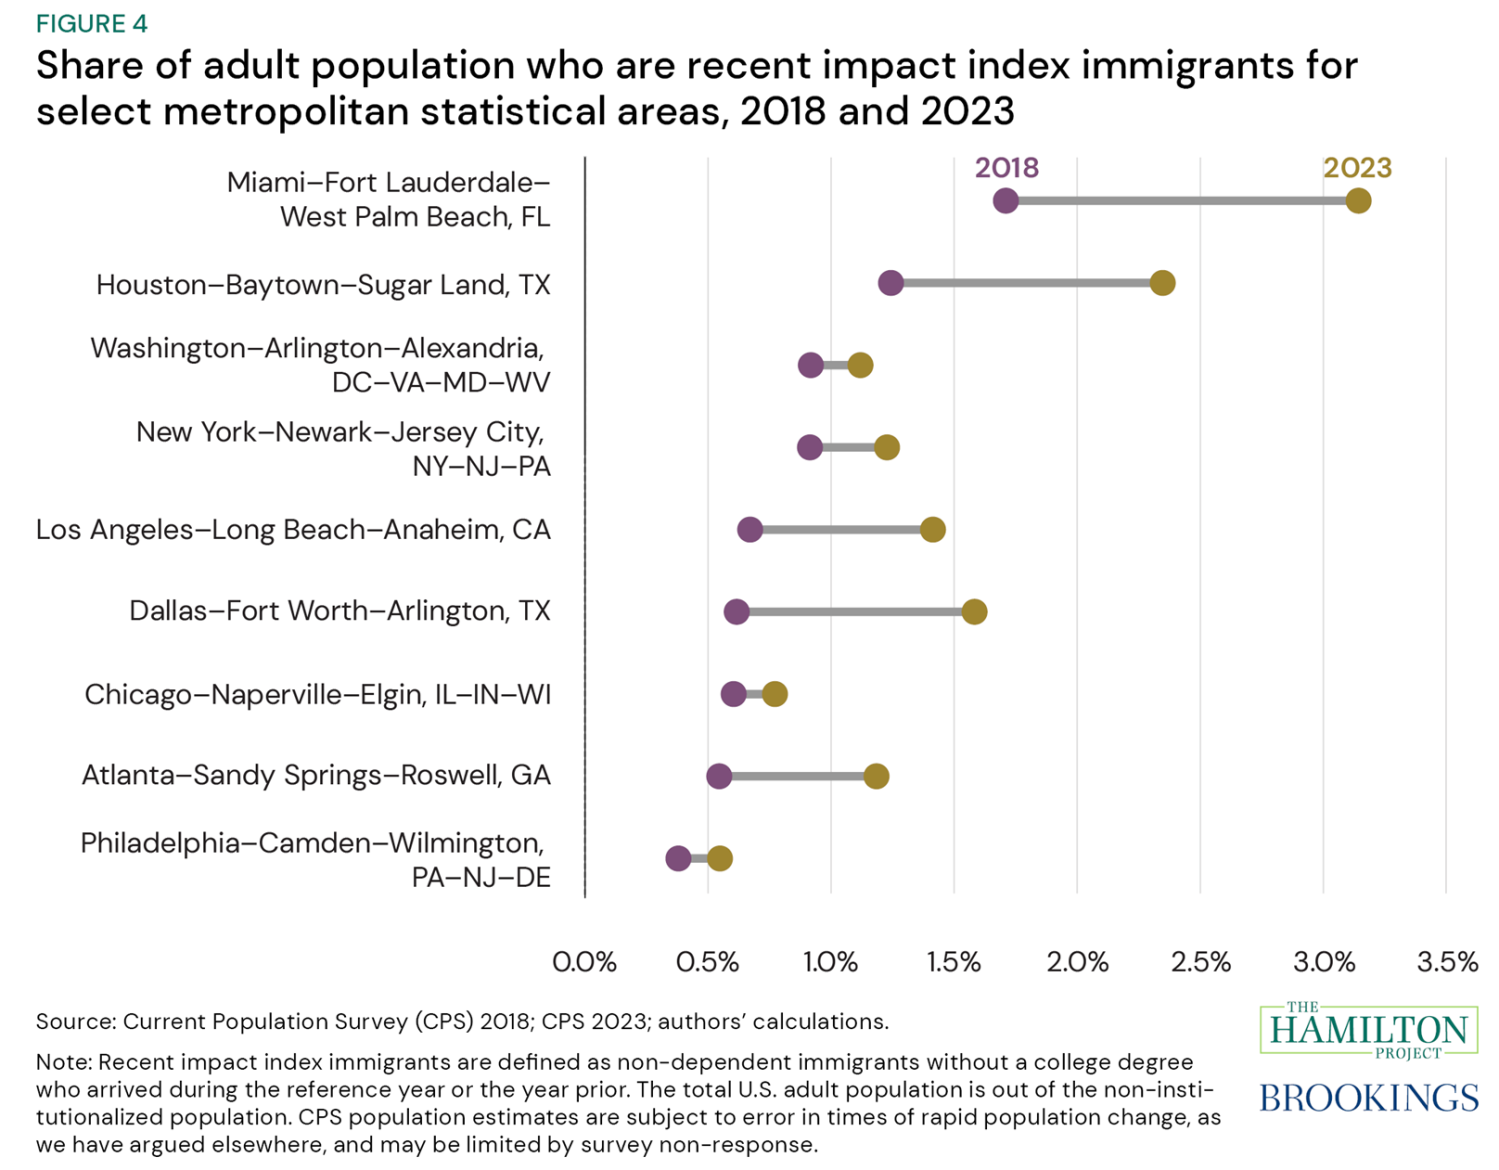 Figure 4: Share of adult population who are recent impact index immigrants for select metropolitan statistical areas, 2018 and 2023. Although recent data for immigration trends at the sub-state level are subject to significant uncertainty, we examine patterns for metropolitan statistical areas (MSAs) with at least 5 million people in 2023 and find that all nine of these areas experienced rising shares of recent impact index immigrants between 2018 and 2023.